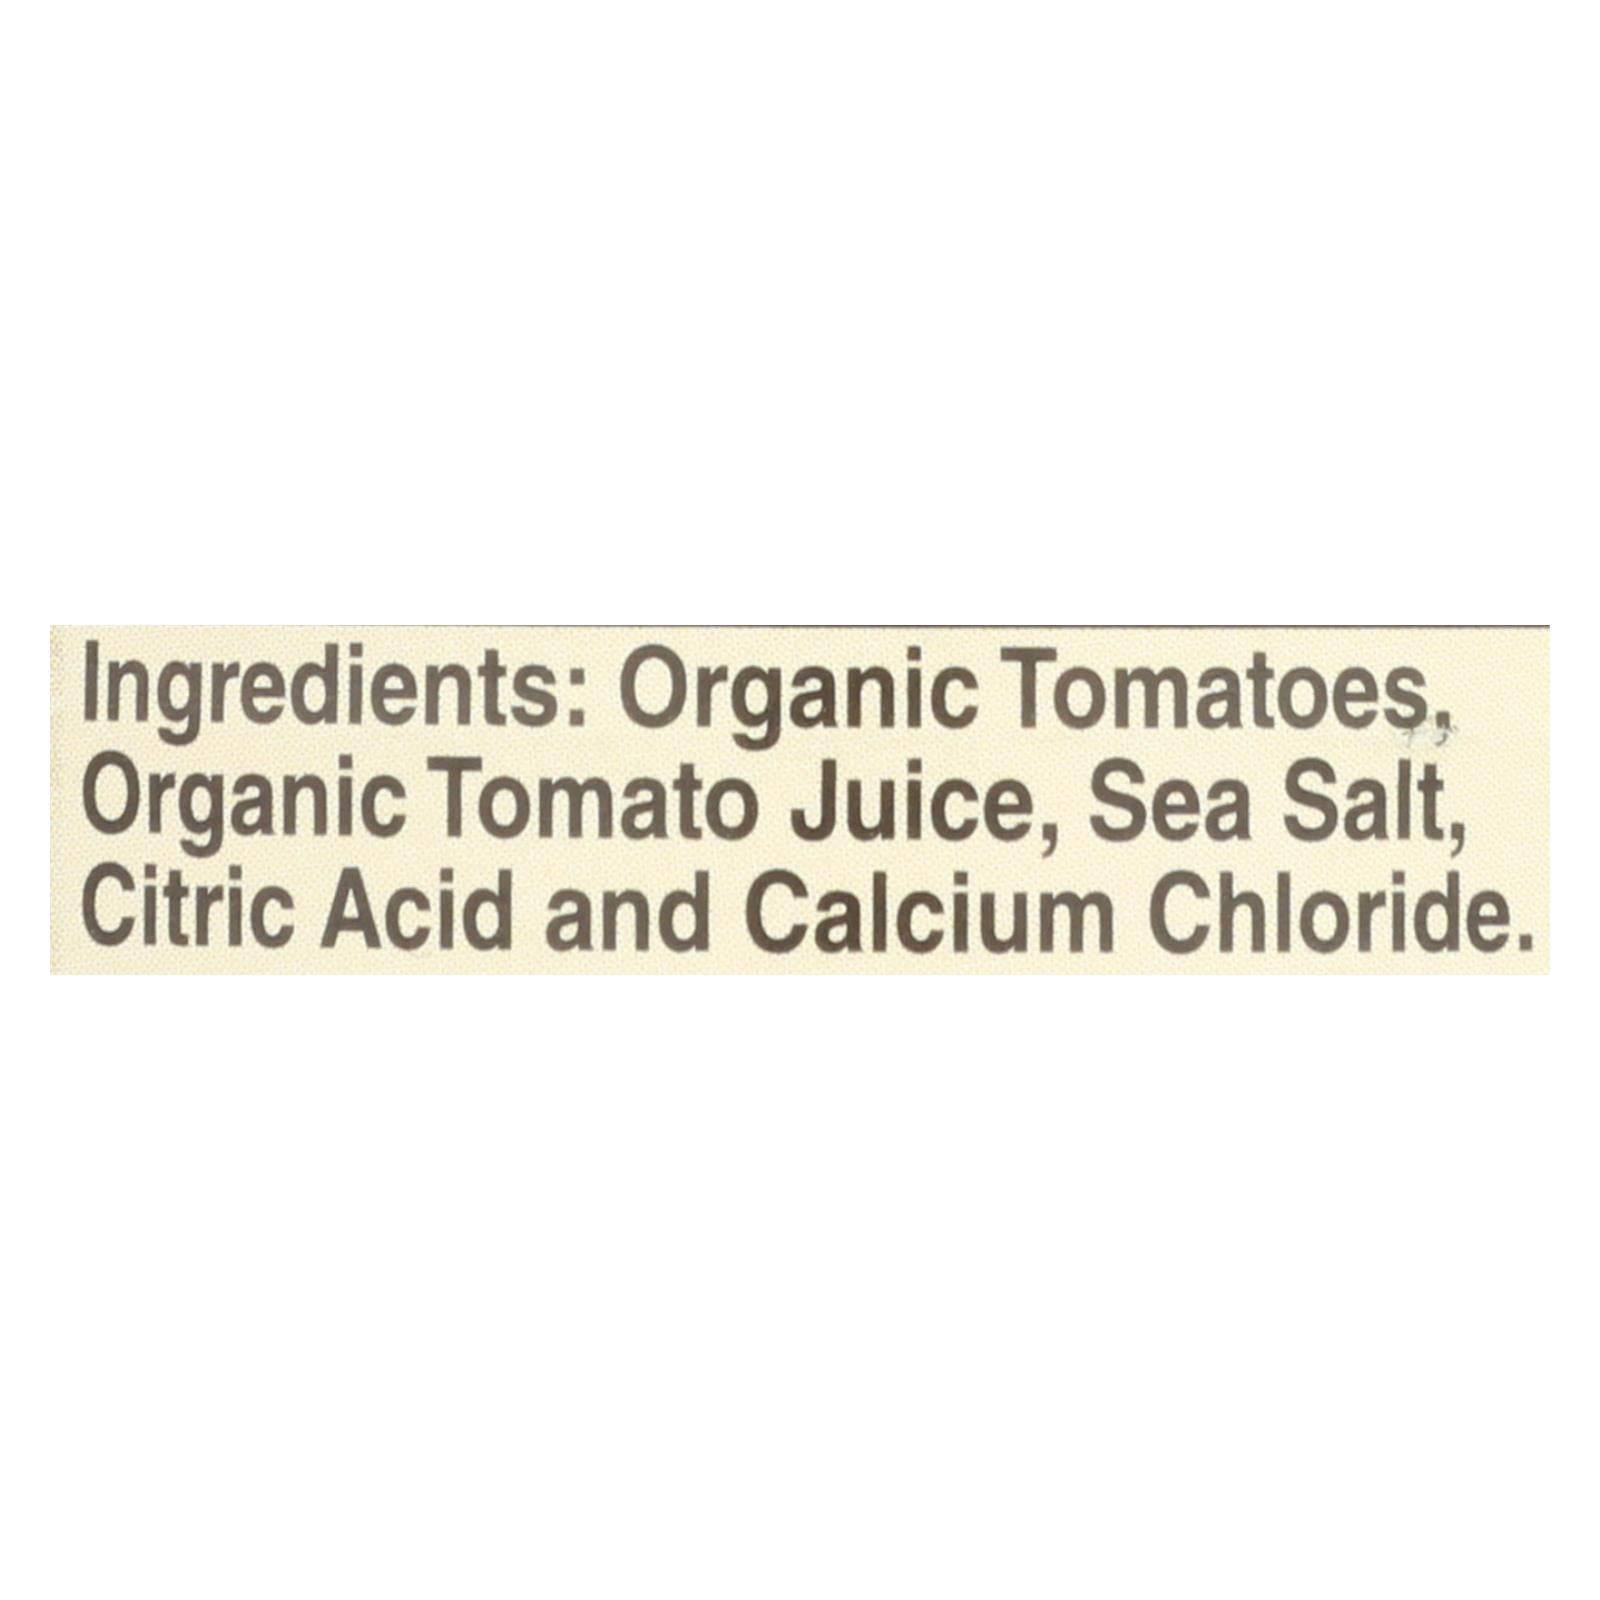 Buy Muir Glen Organic Tomatoes Diced - Tomatoes - Case Of 12 - 14.5 Oz.  at OnlyNaturals.us